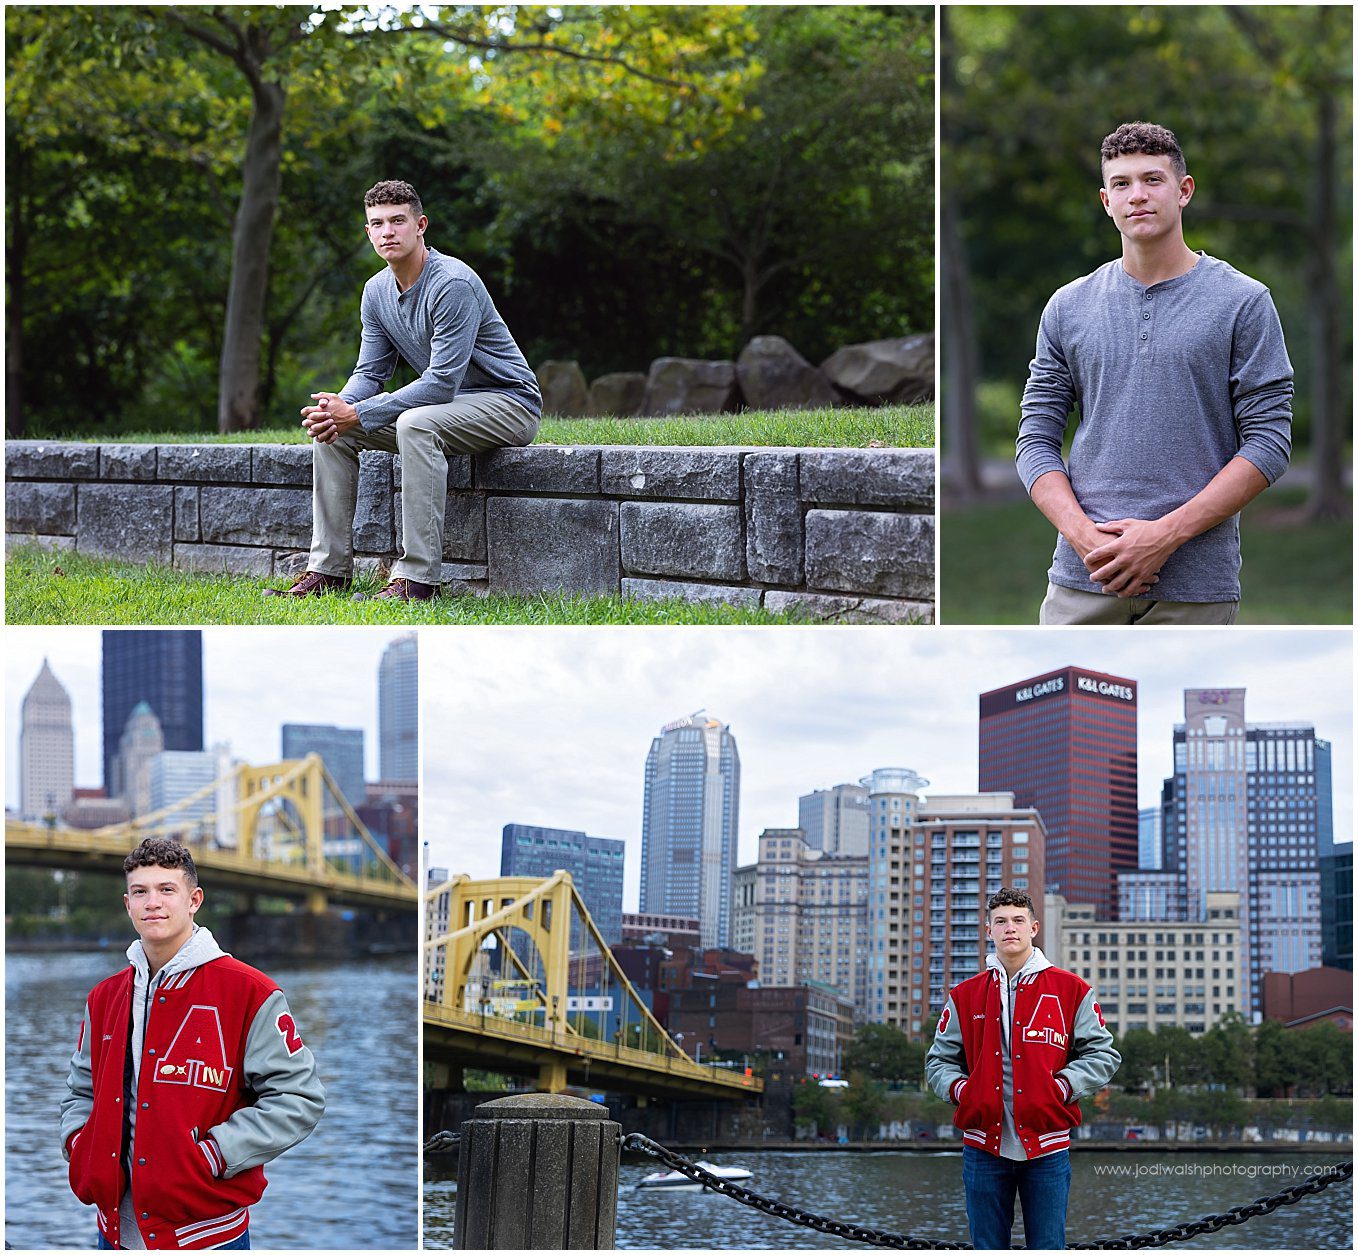 images of a senior guy at Herrs Island Park and the Allegheny Landing in Pittsburgh. He's wearing a gray sweater in the park photos and a red letterman's jacket in images downtown.